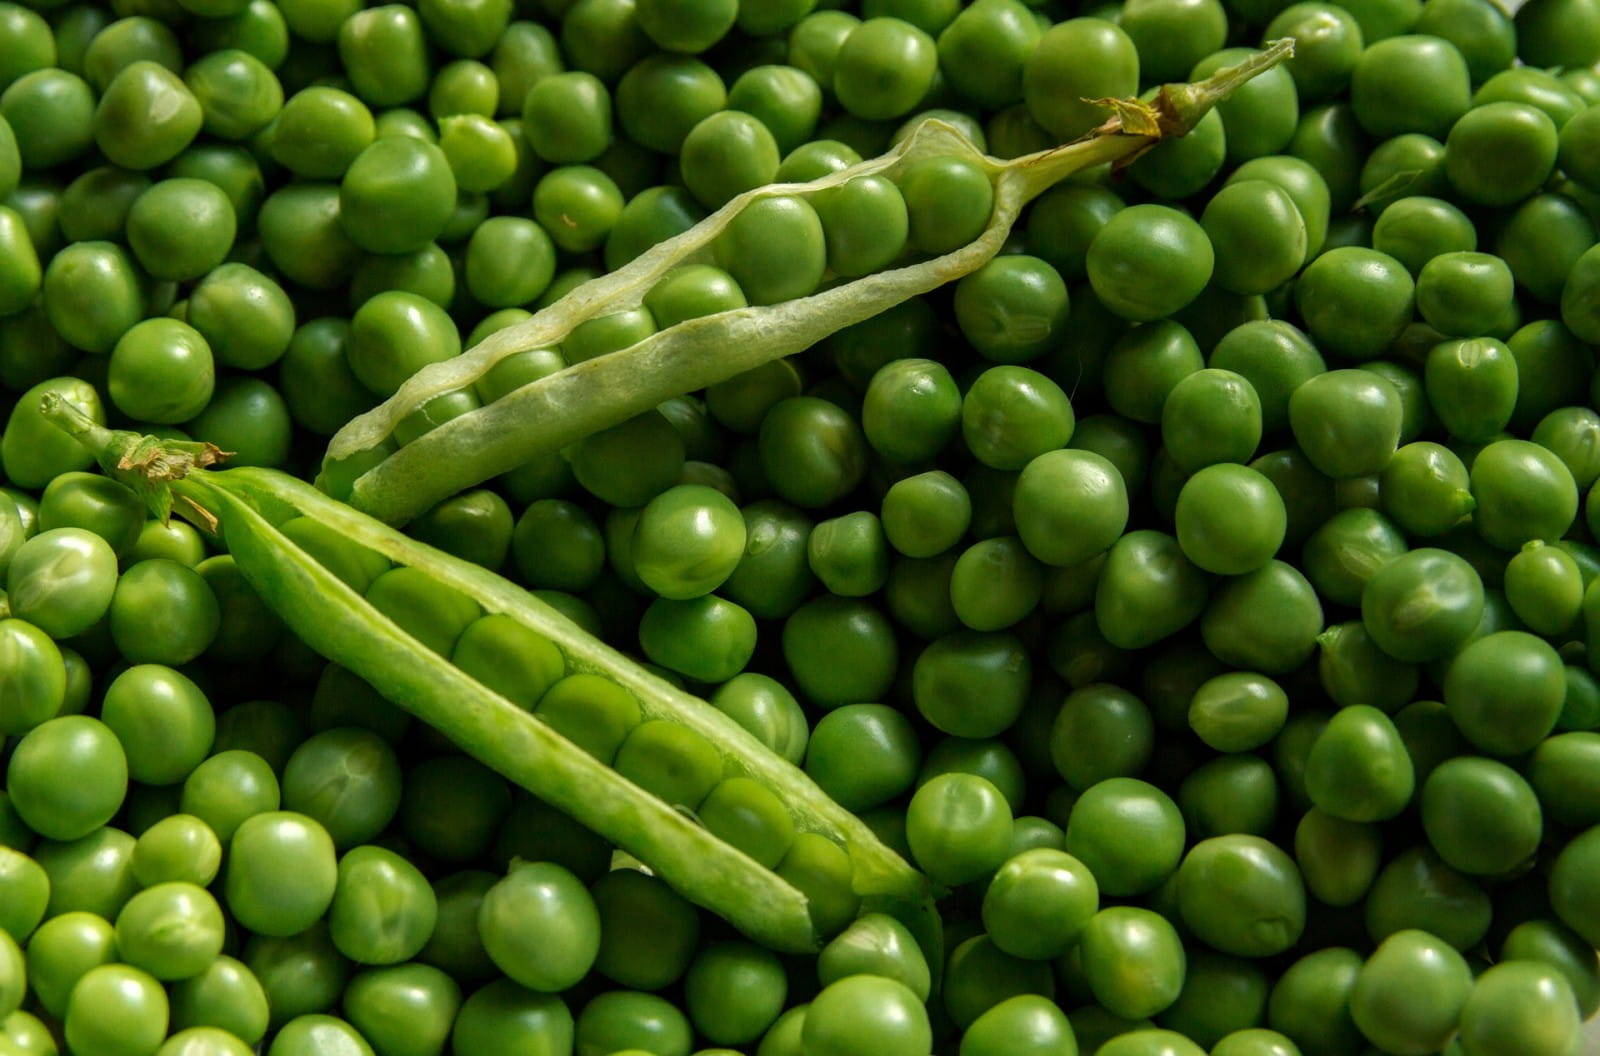 Peas and pinot